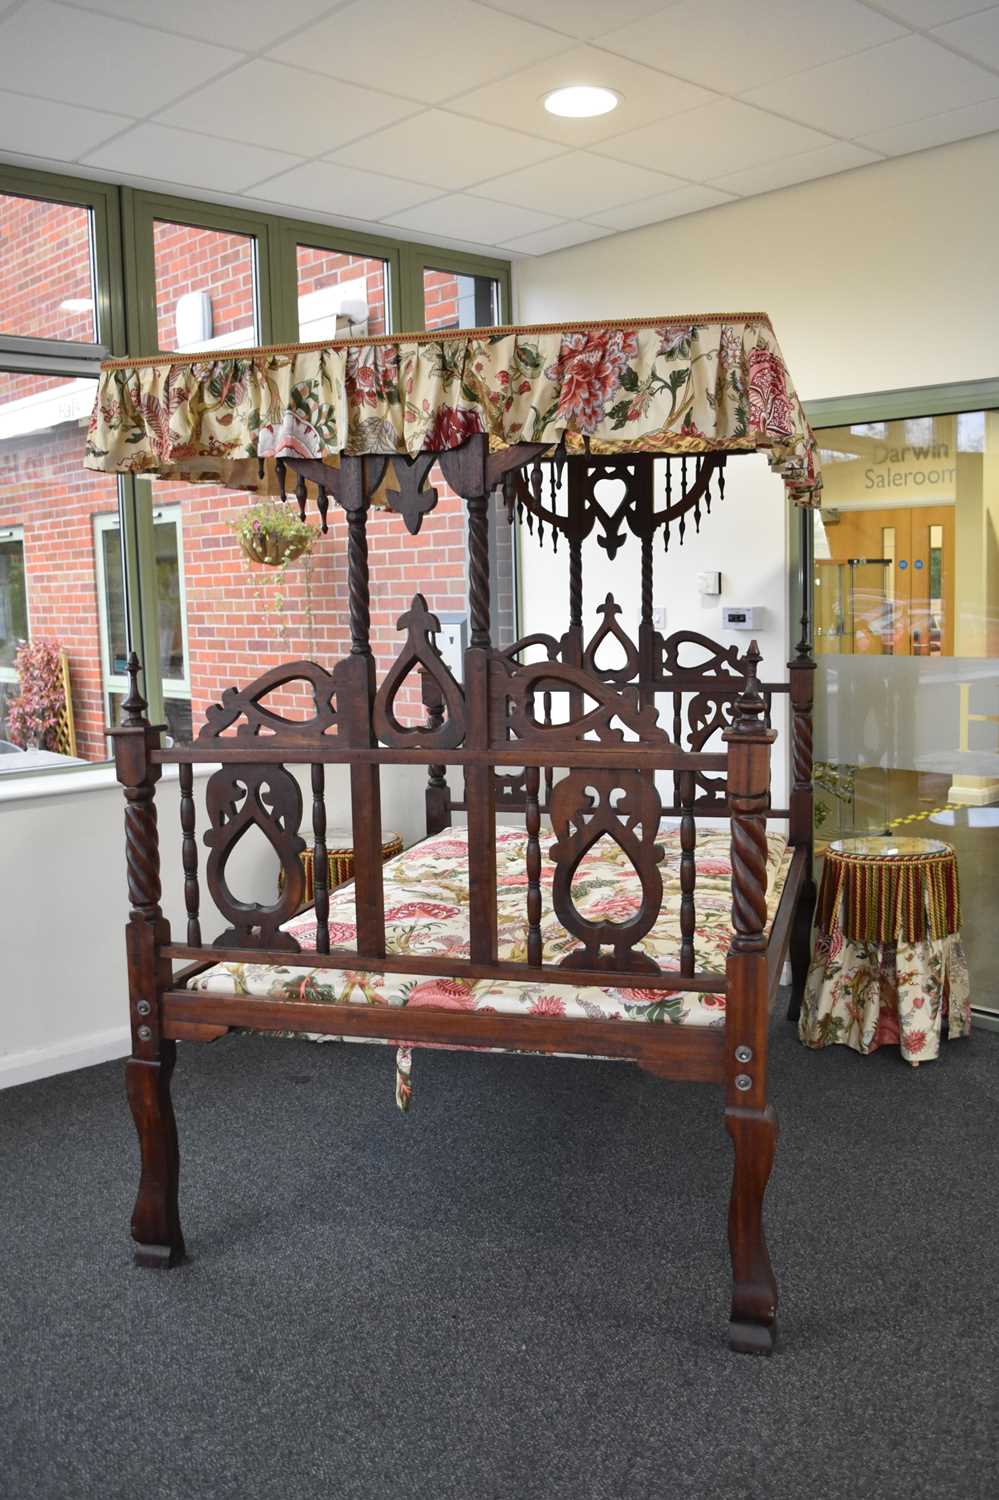 An Indian canopied hard-wood double bed